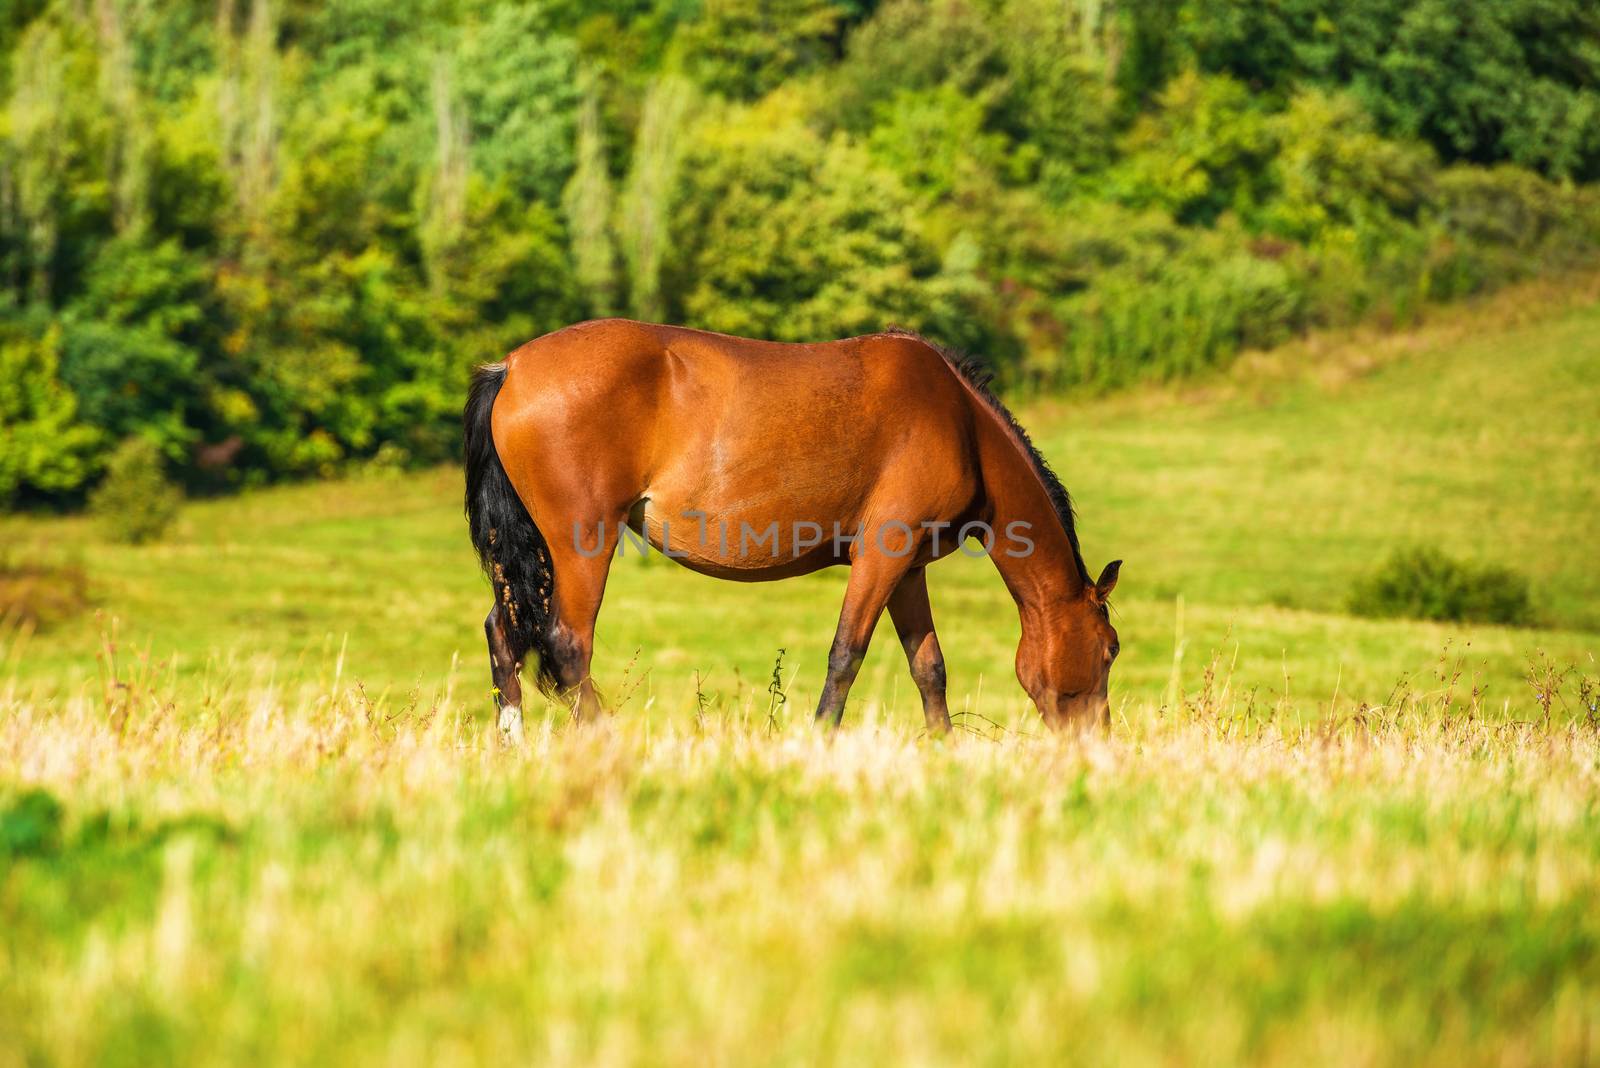 Dark bay horse grazing on a field with green grass